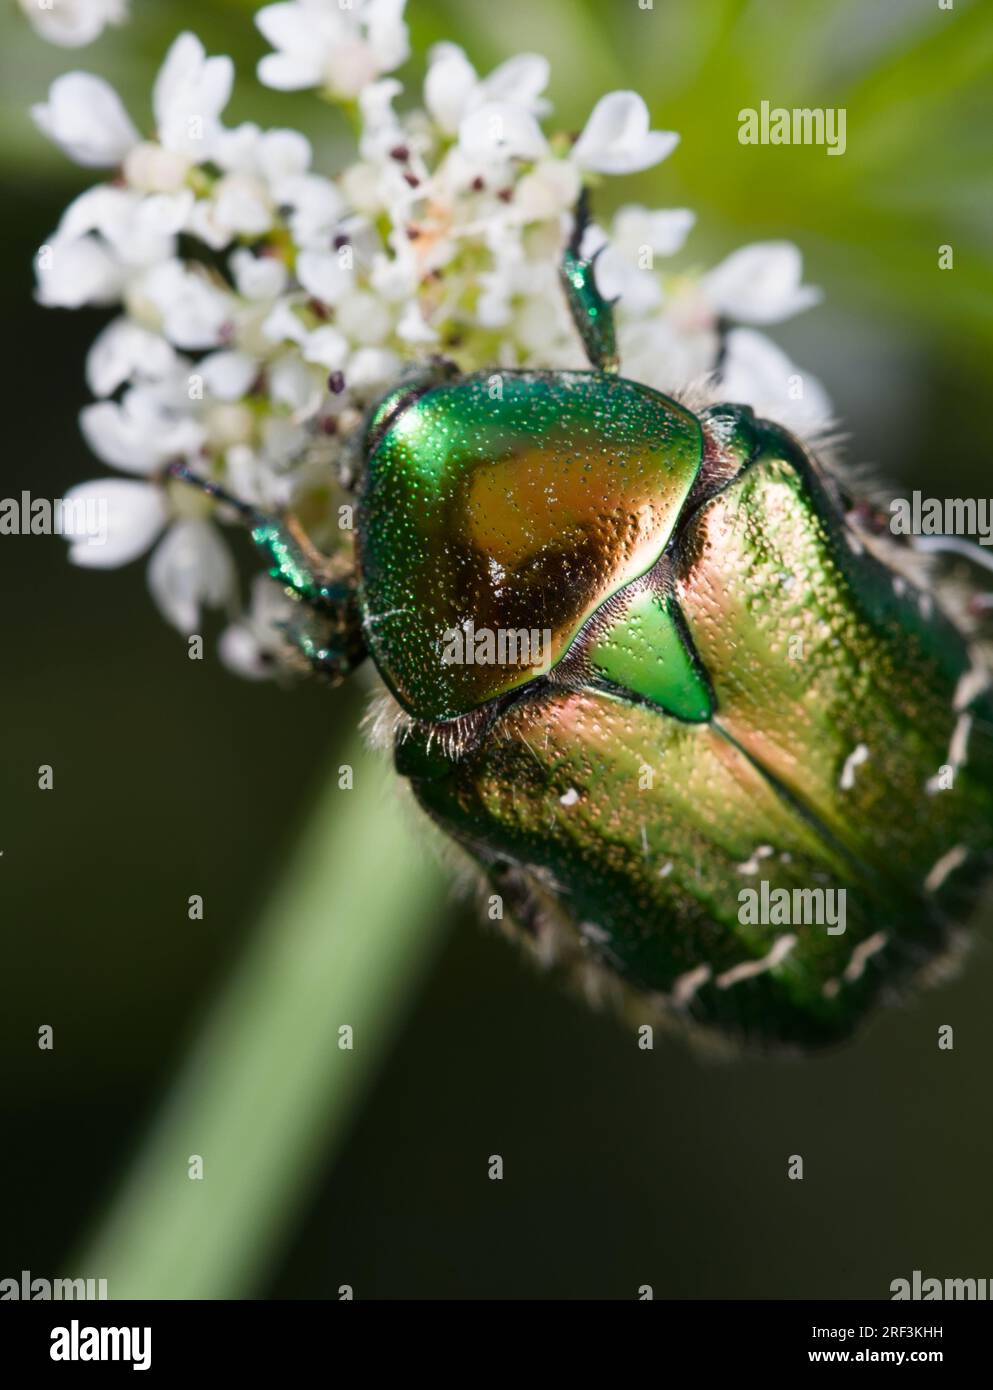 European Rose Chafer Beetle, Cetonia aurata, Feeding On The Pollen, Nectar Of The Water Dropwort Plant, Oenanthe, New Forest UK Stock Photo